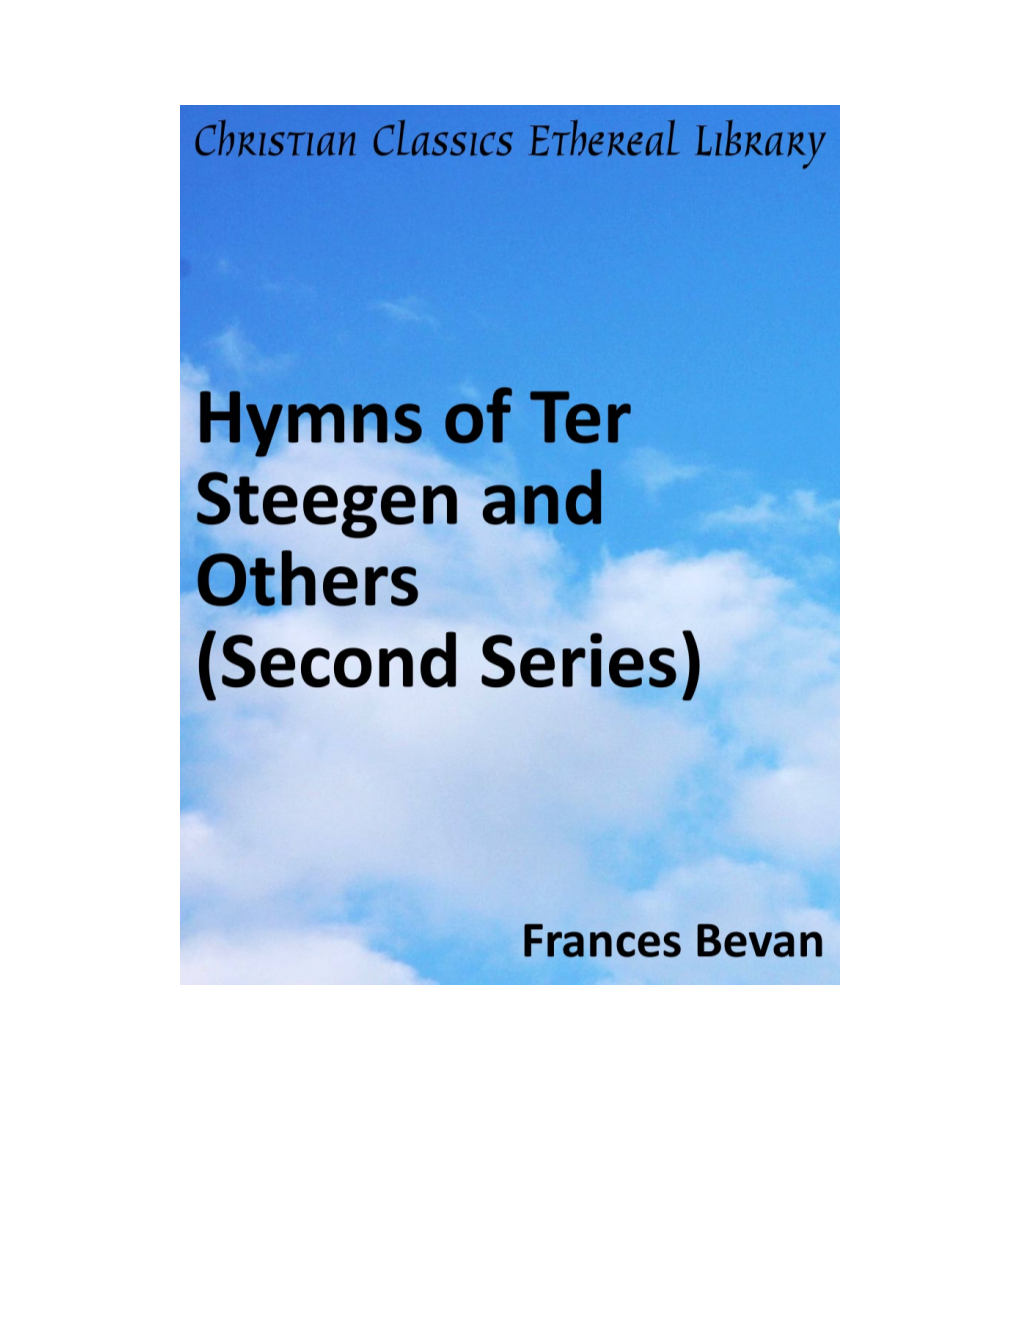 Hymns of Ter Steegen and Others (Second Series)